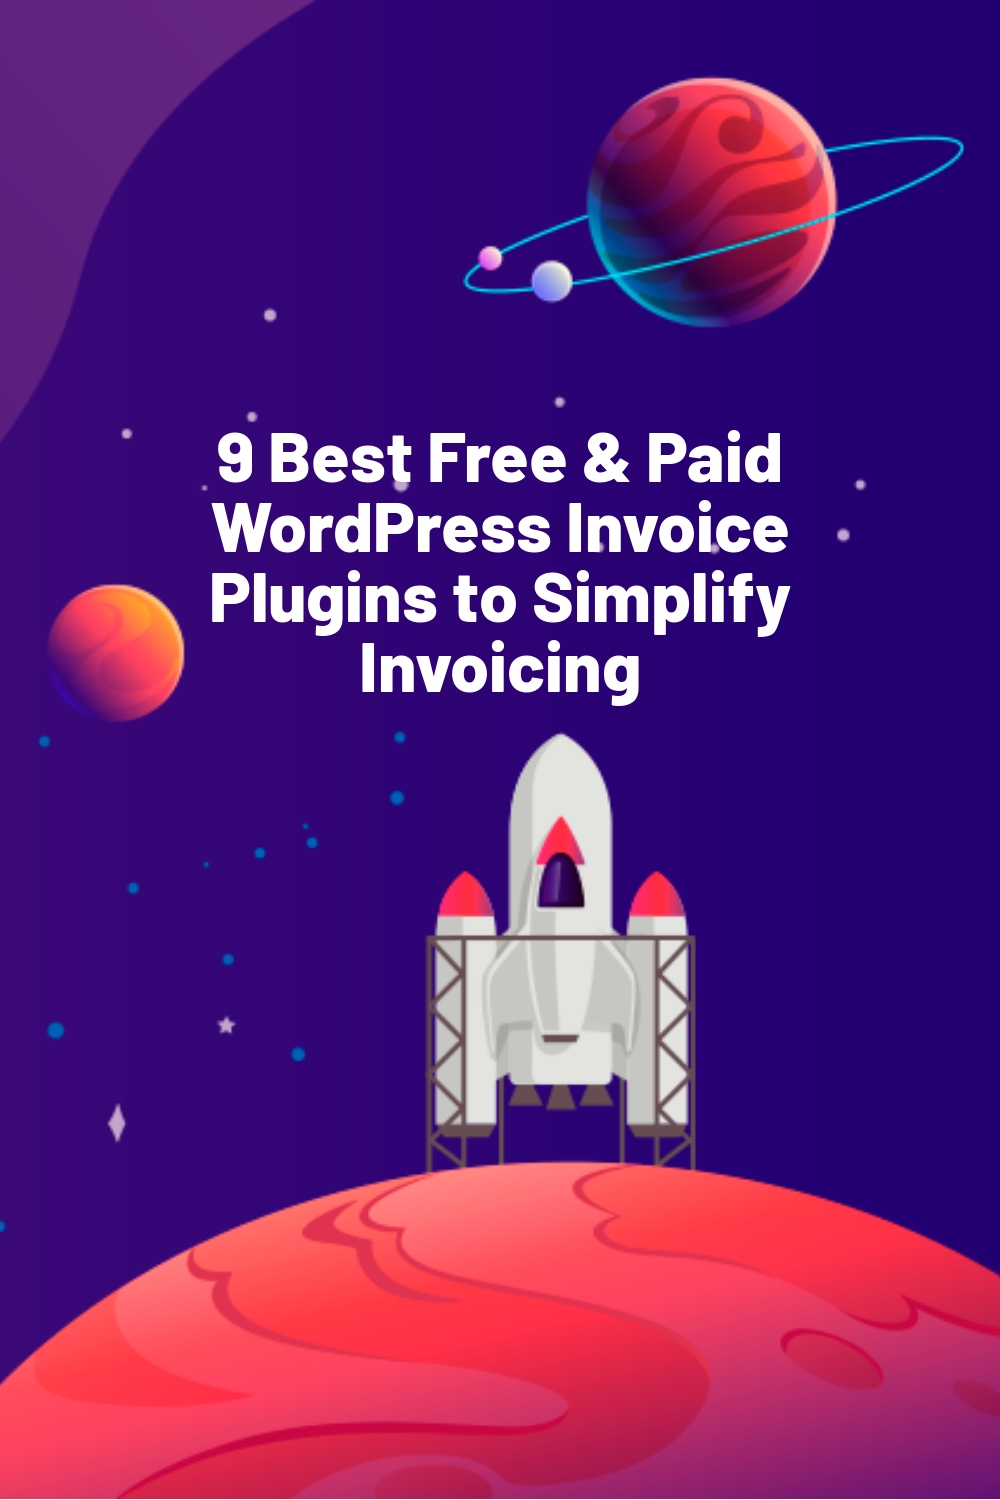 9 Best Free & Paid WordPress Invoice Plugins to Simplify Invoicing